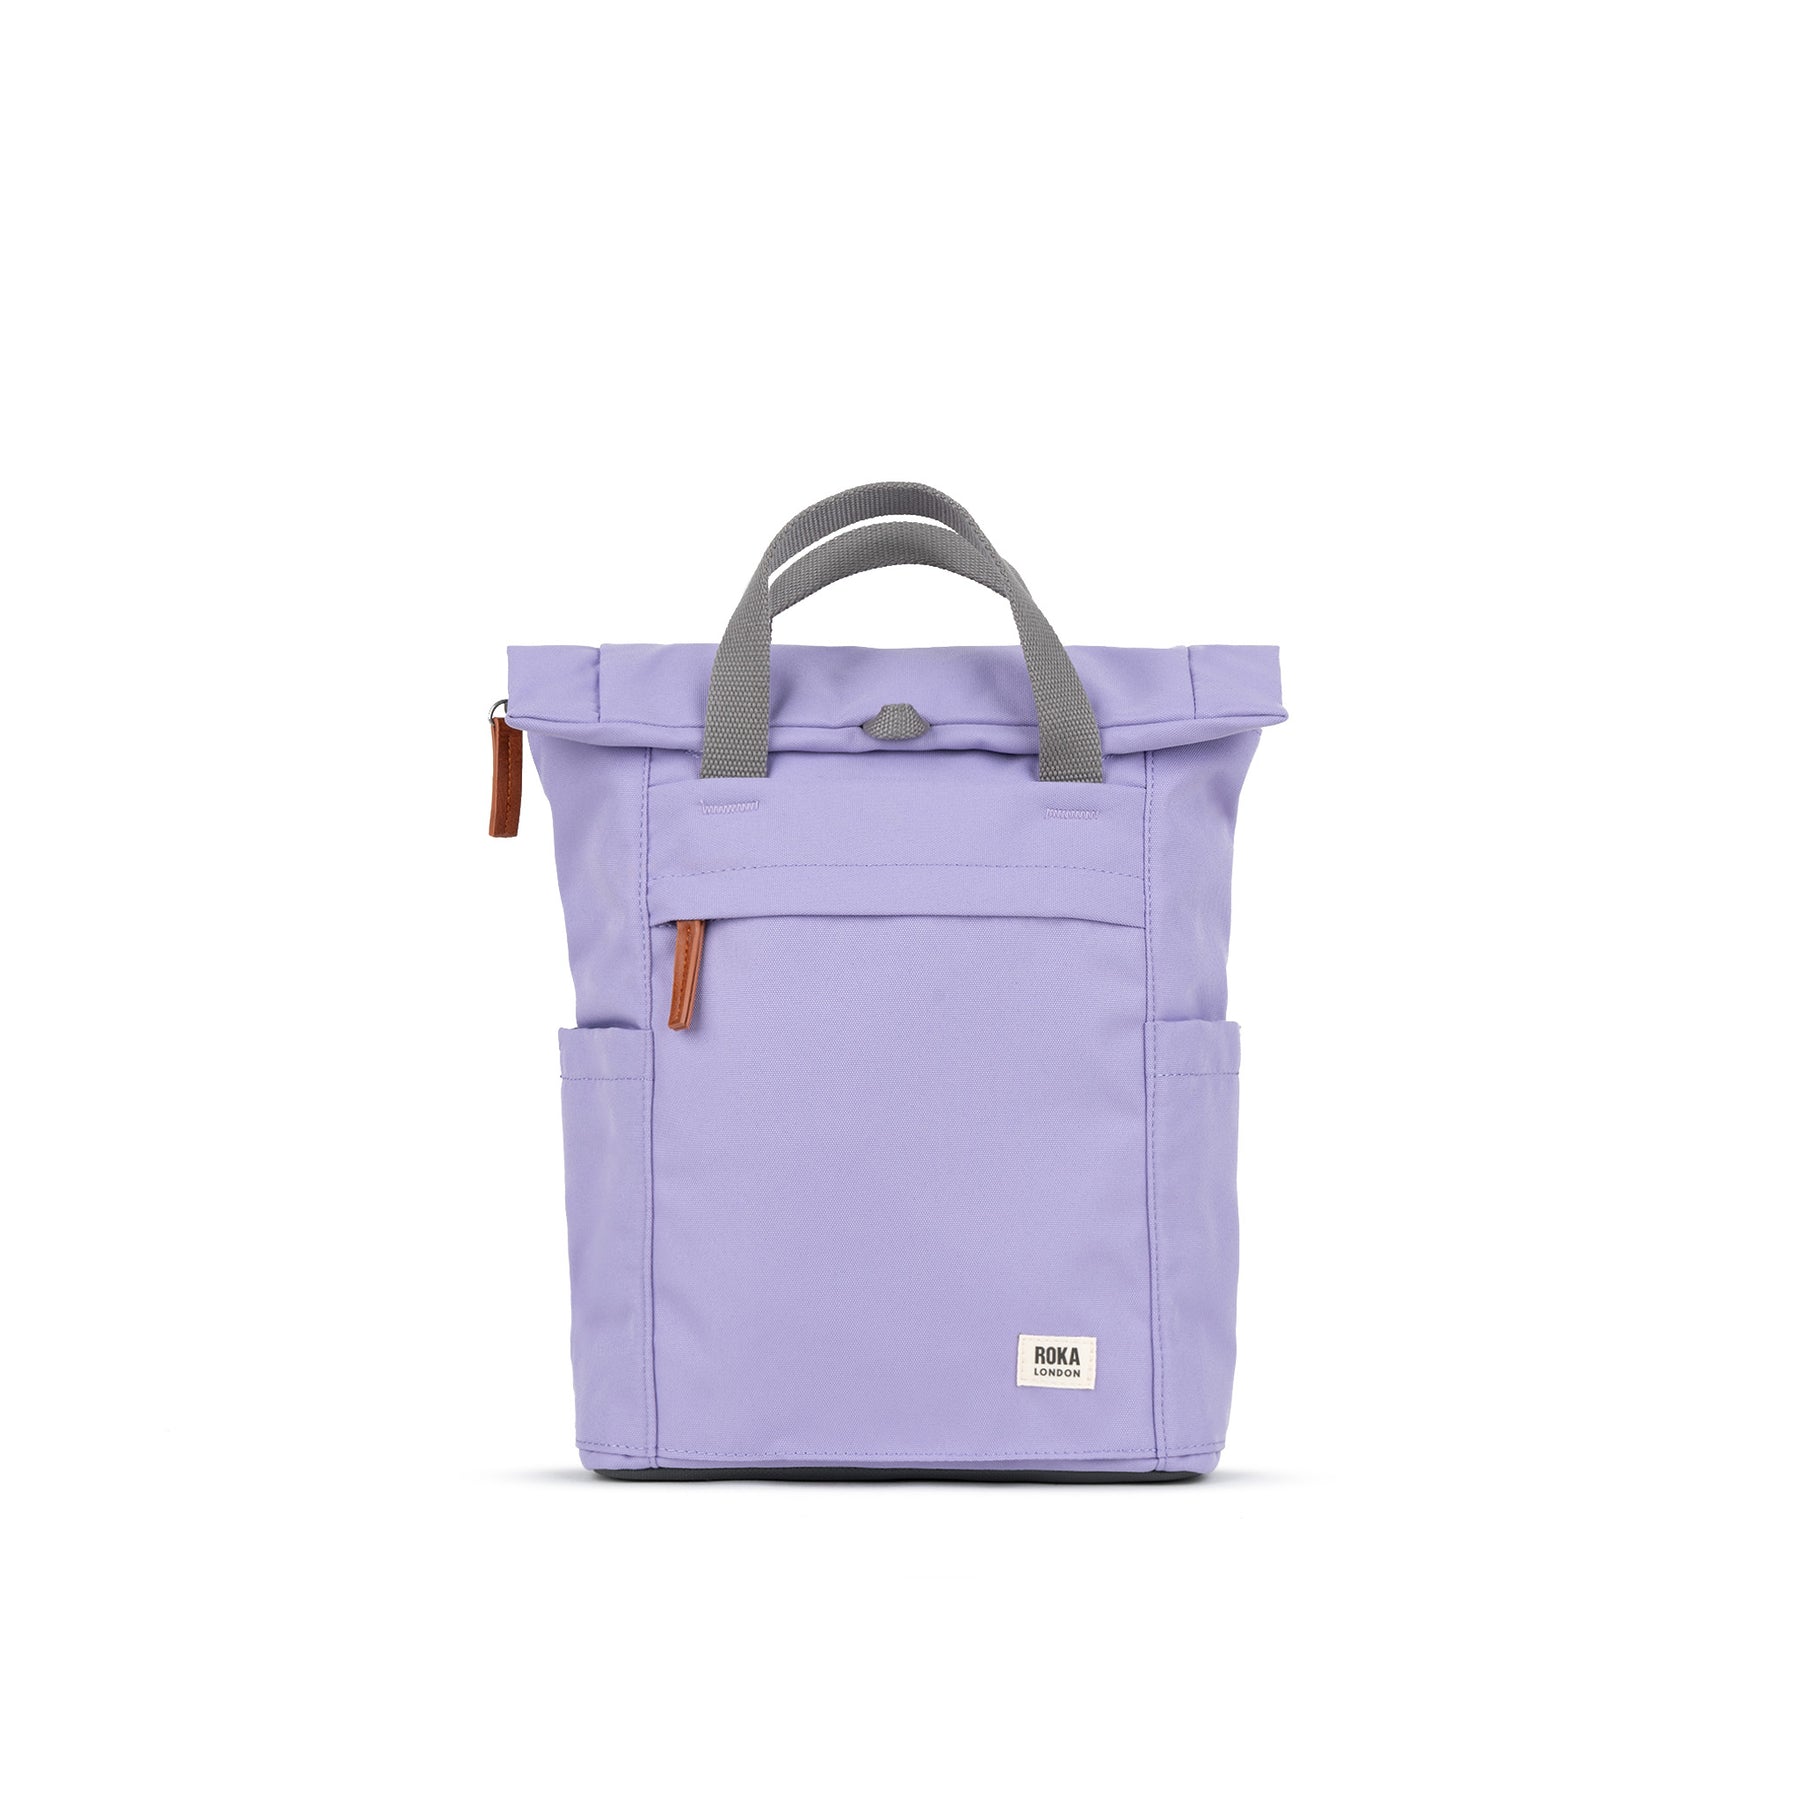 ROKA Finchley A Lavender Small Recycled Canvas Bag